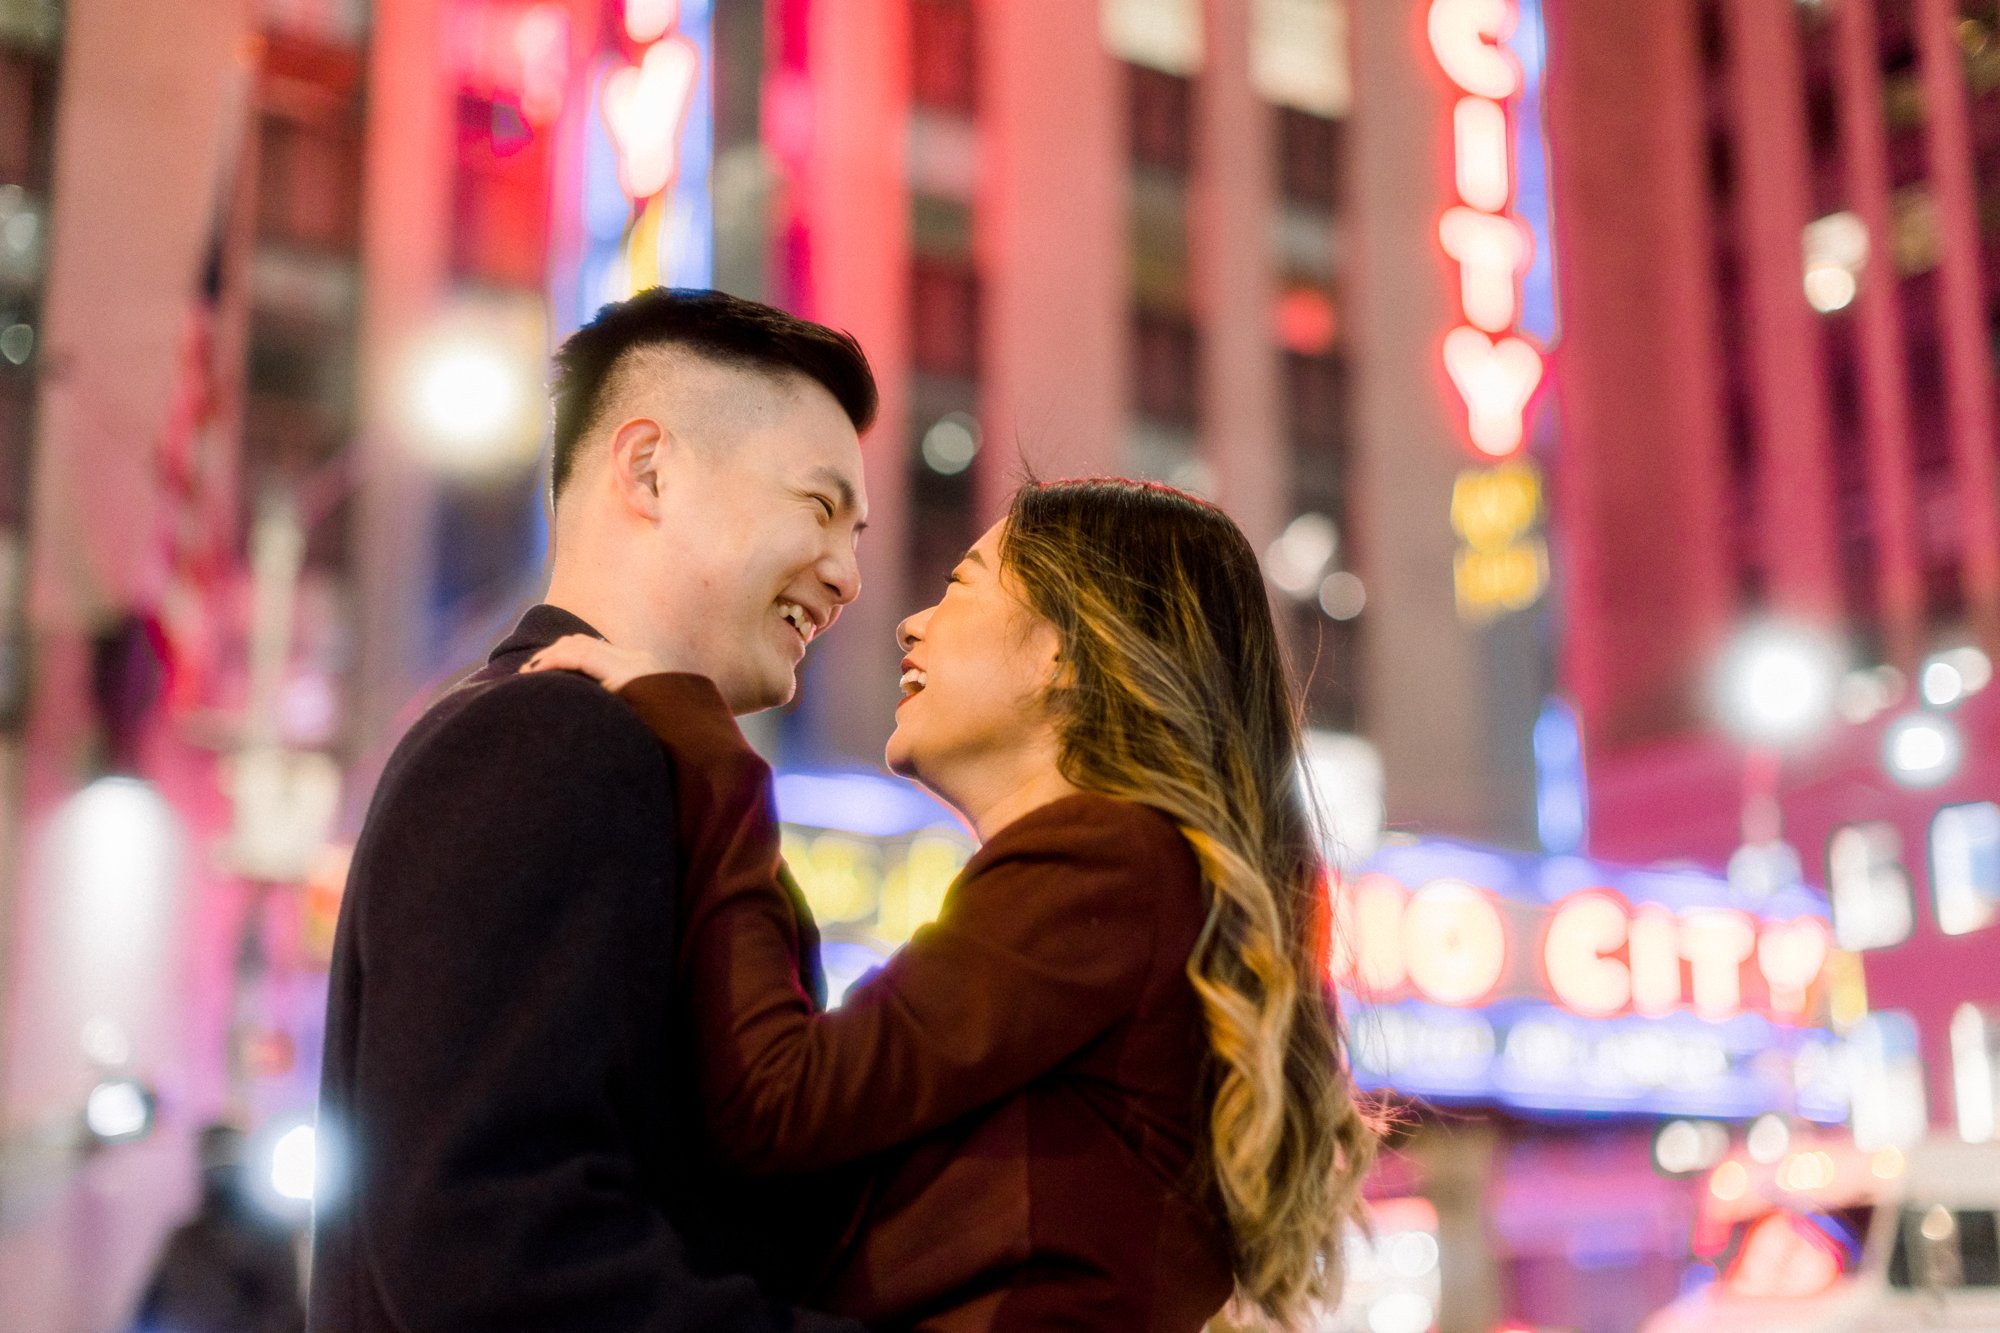 Sparkling Iconic Winter Times Square Engagement Shoot  at Night